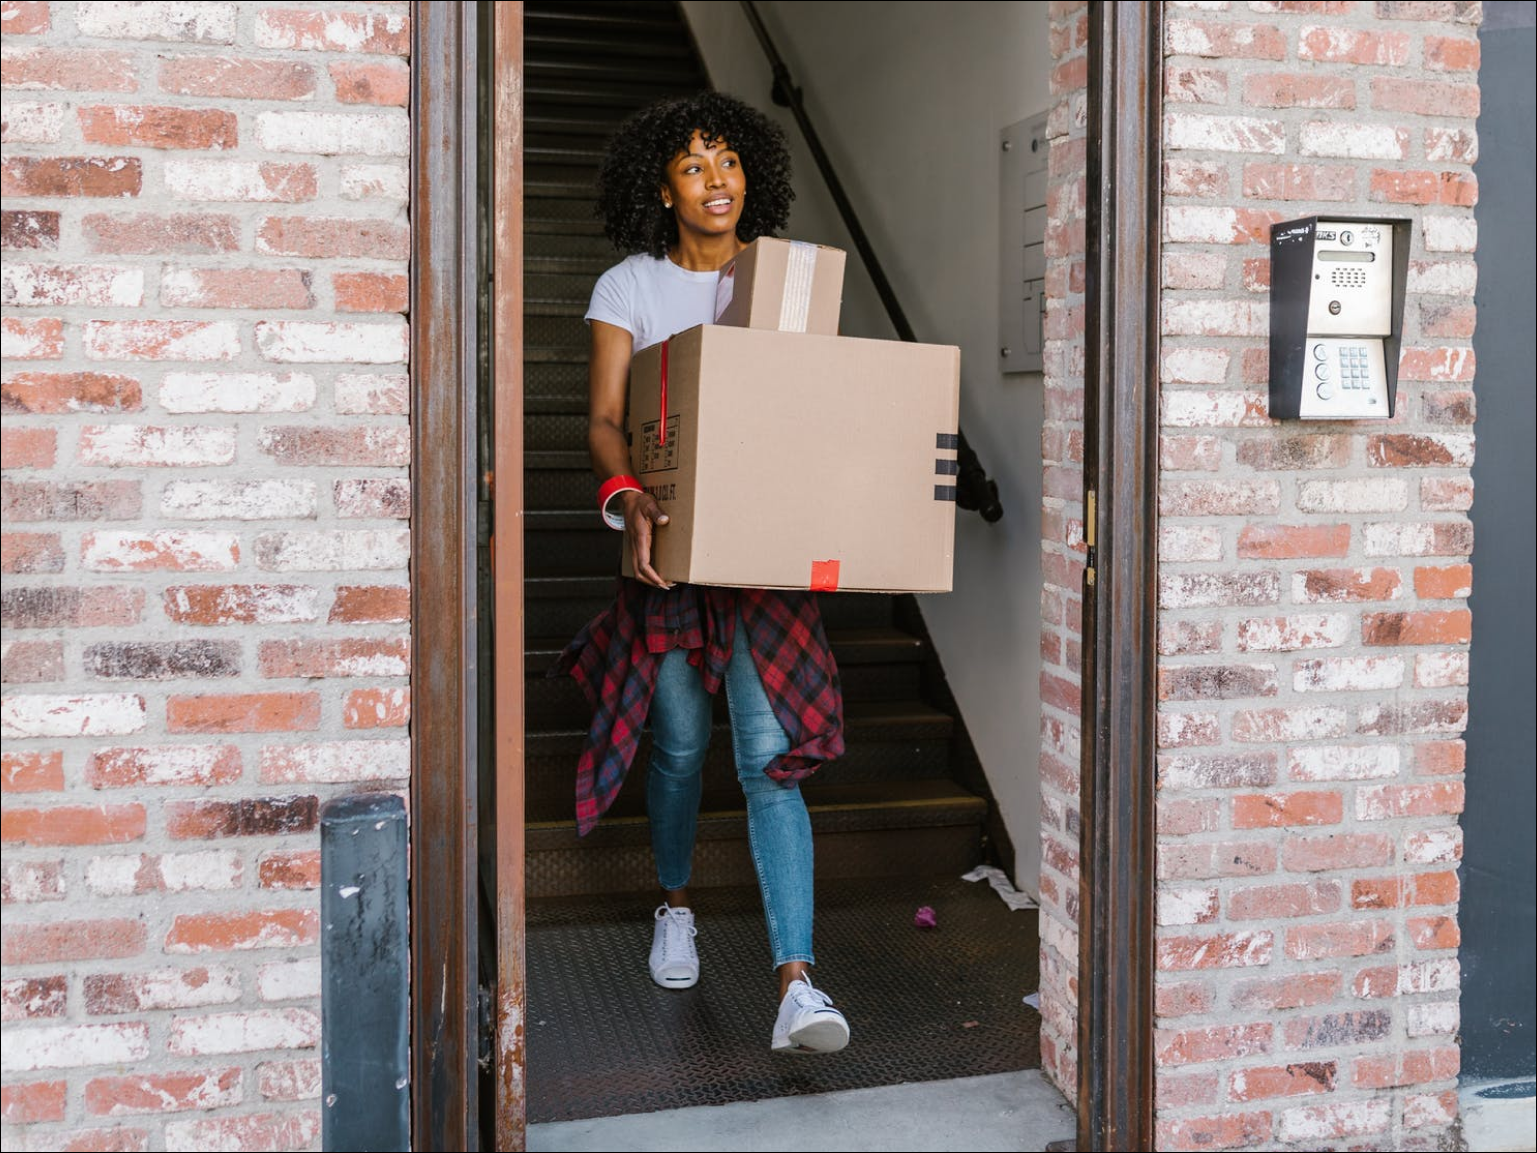 Image of a renter carrying boxes outside, while moving